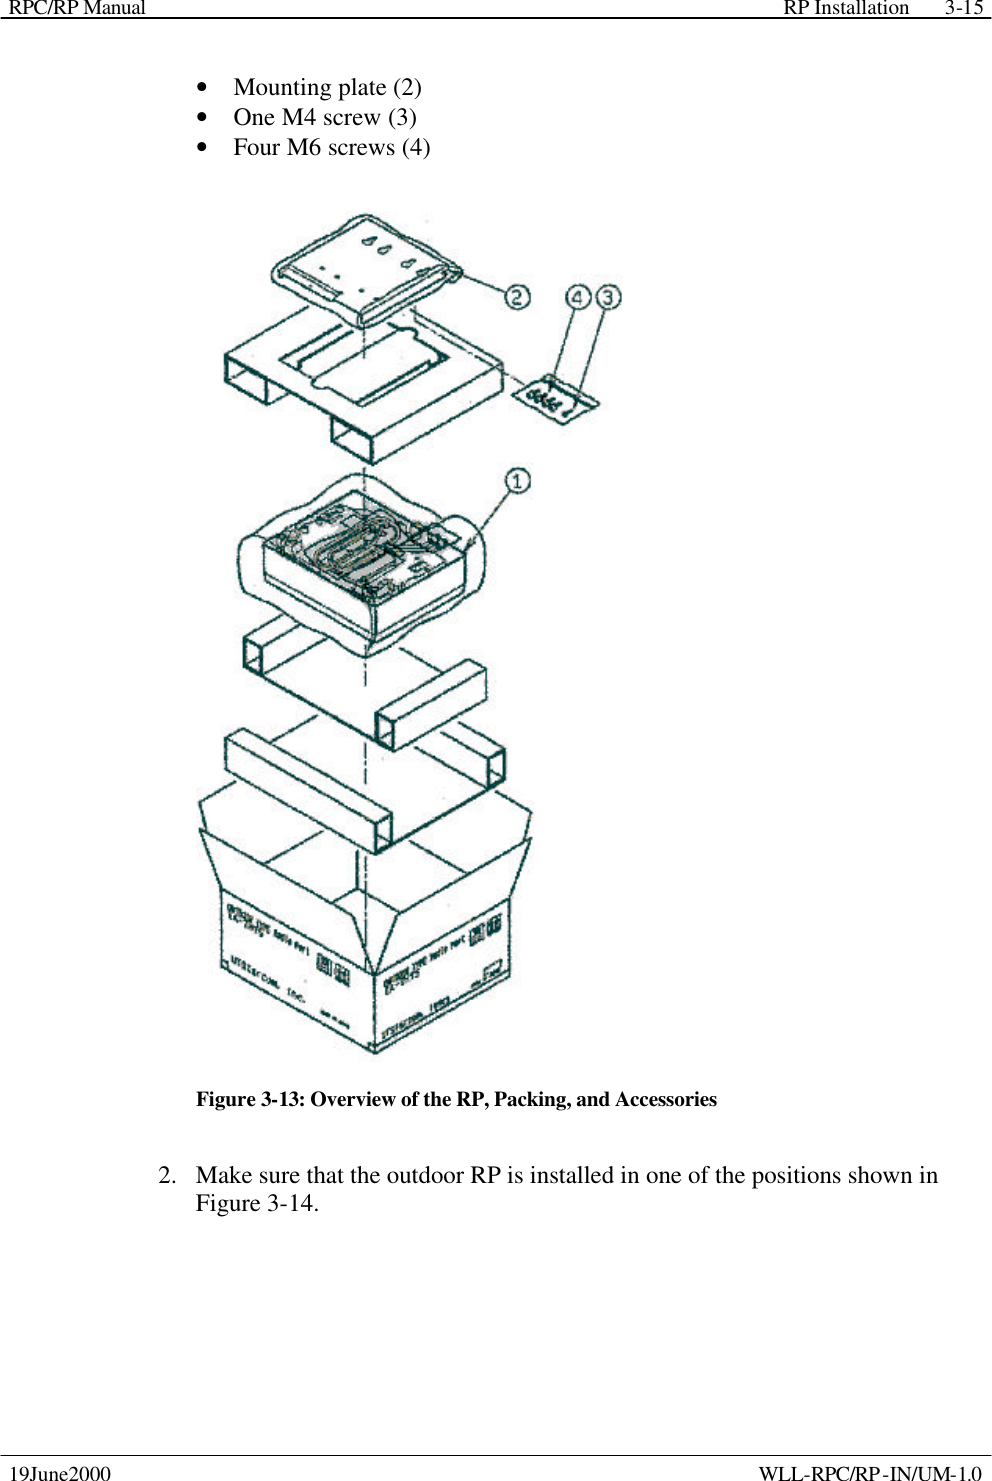 RPC/RP Manual    RP Installation  19June2000    WLL-RPC/RP-IN/UM-1.0 3-15• Mounting plate (2) • One M4 screw (3) • Four M6 screws (4)  Figure 3-13: Overview of the RP, Packing, and Accessories 2.  Make sure that the outdoor RP is installed in one of the positions shown in Figure 3-14. 